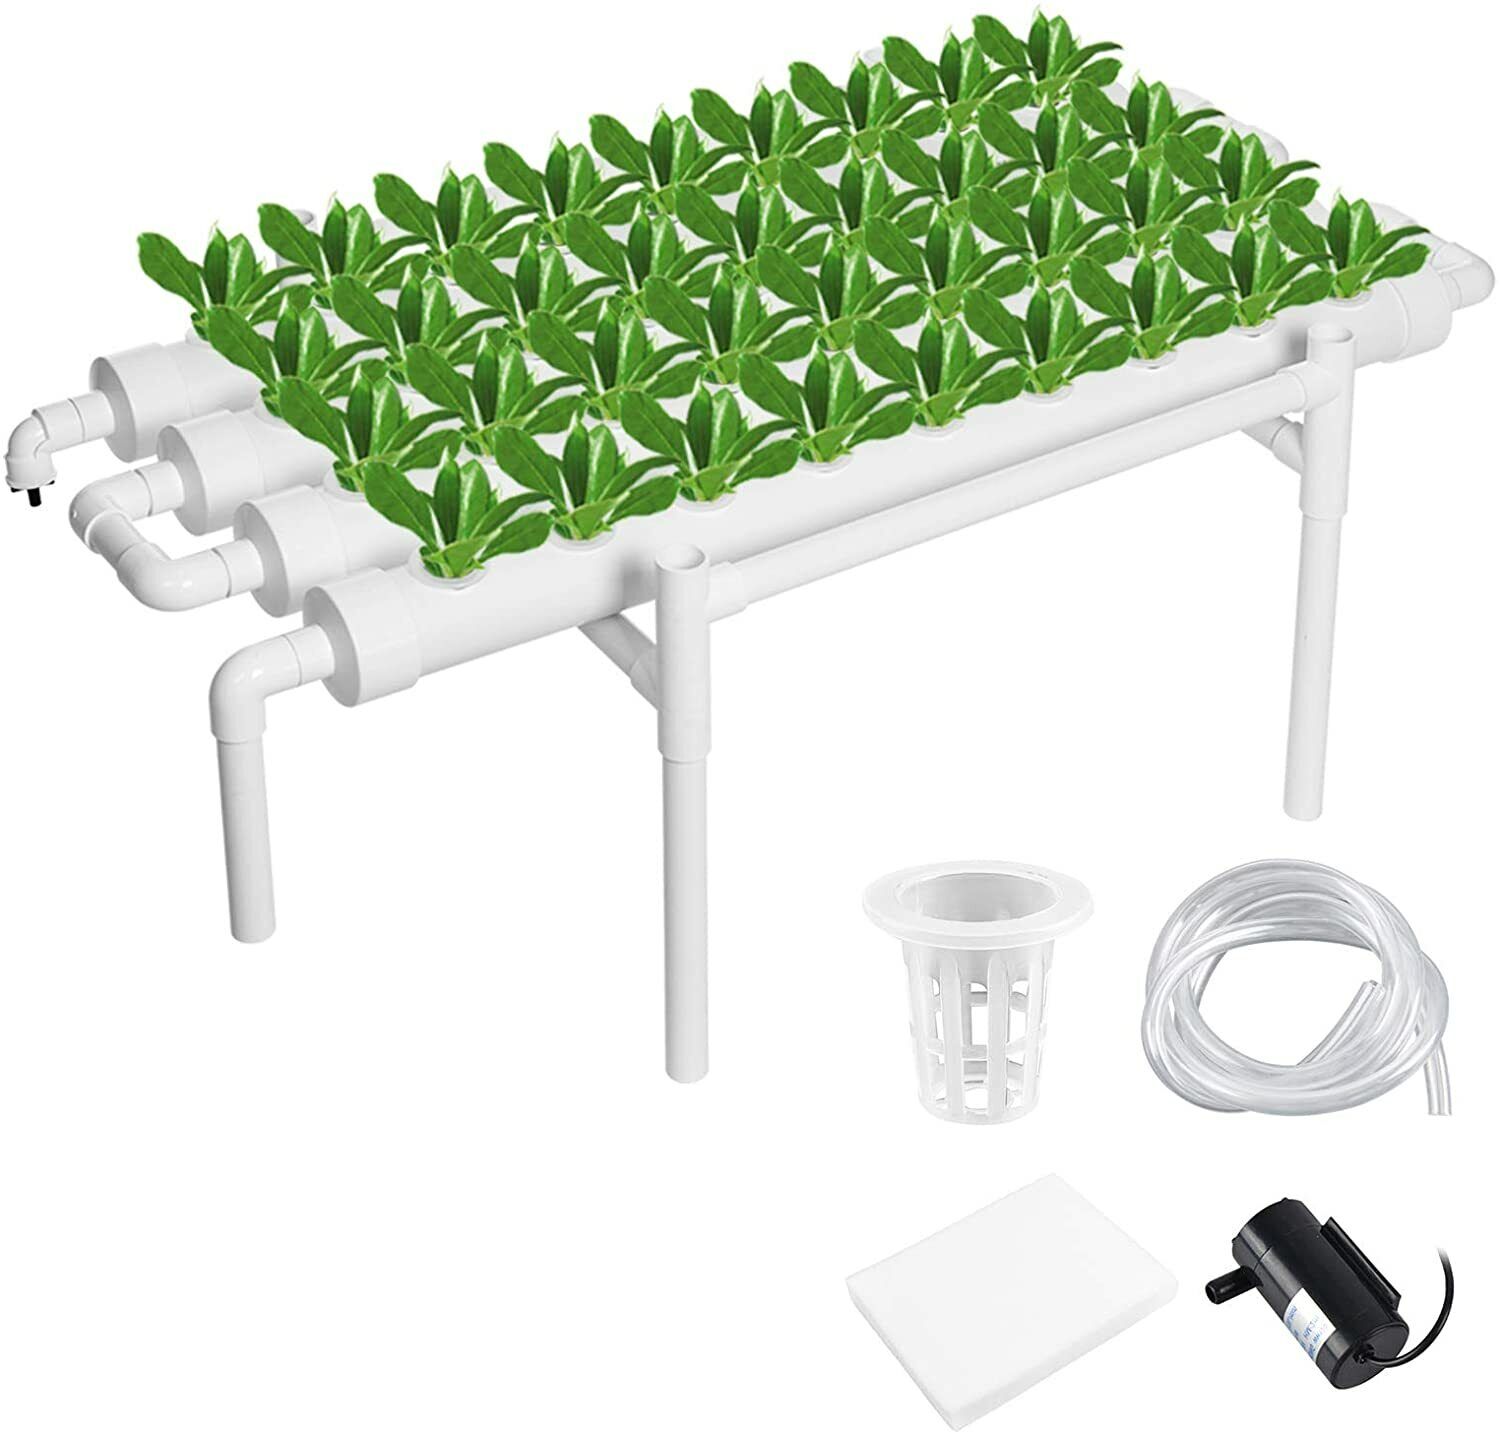 1-layer hydroponic site planting kit 36 planting sites garden plant system